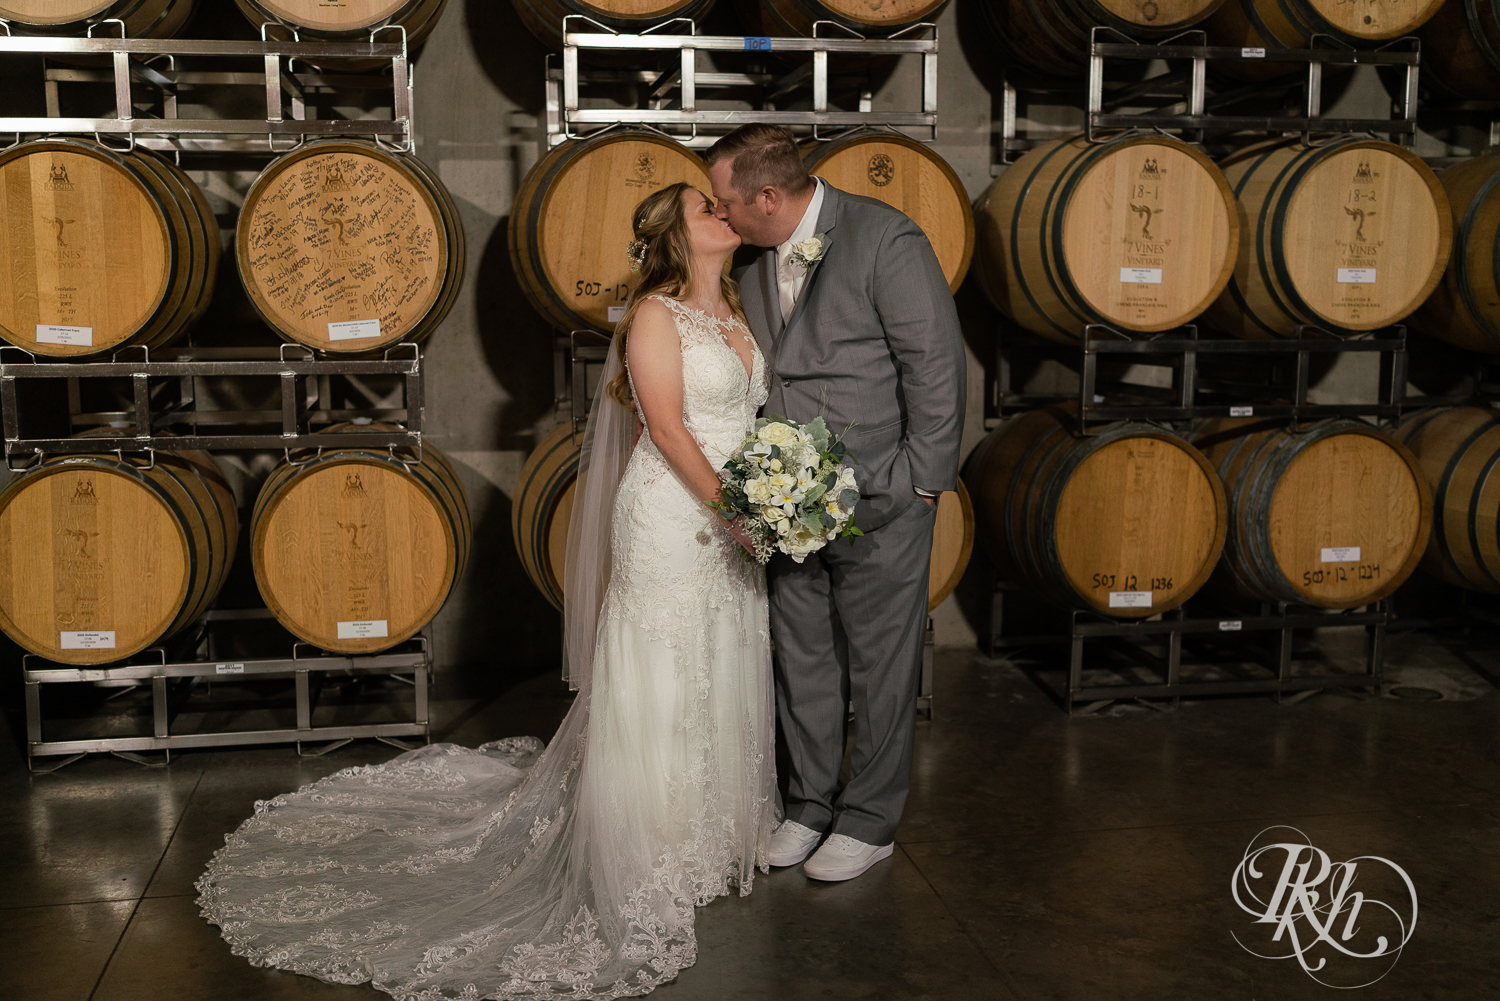 Bride and groom kissing in front of wine barrels at 7 Vines Vineyard in Dellwood, Minnesota.